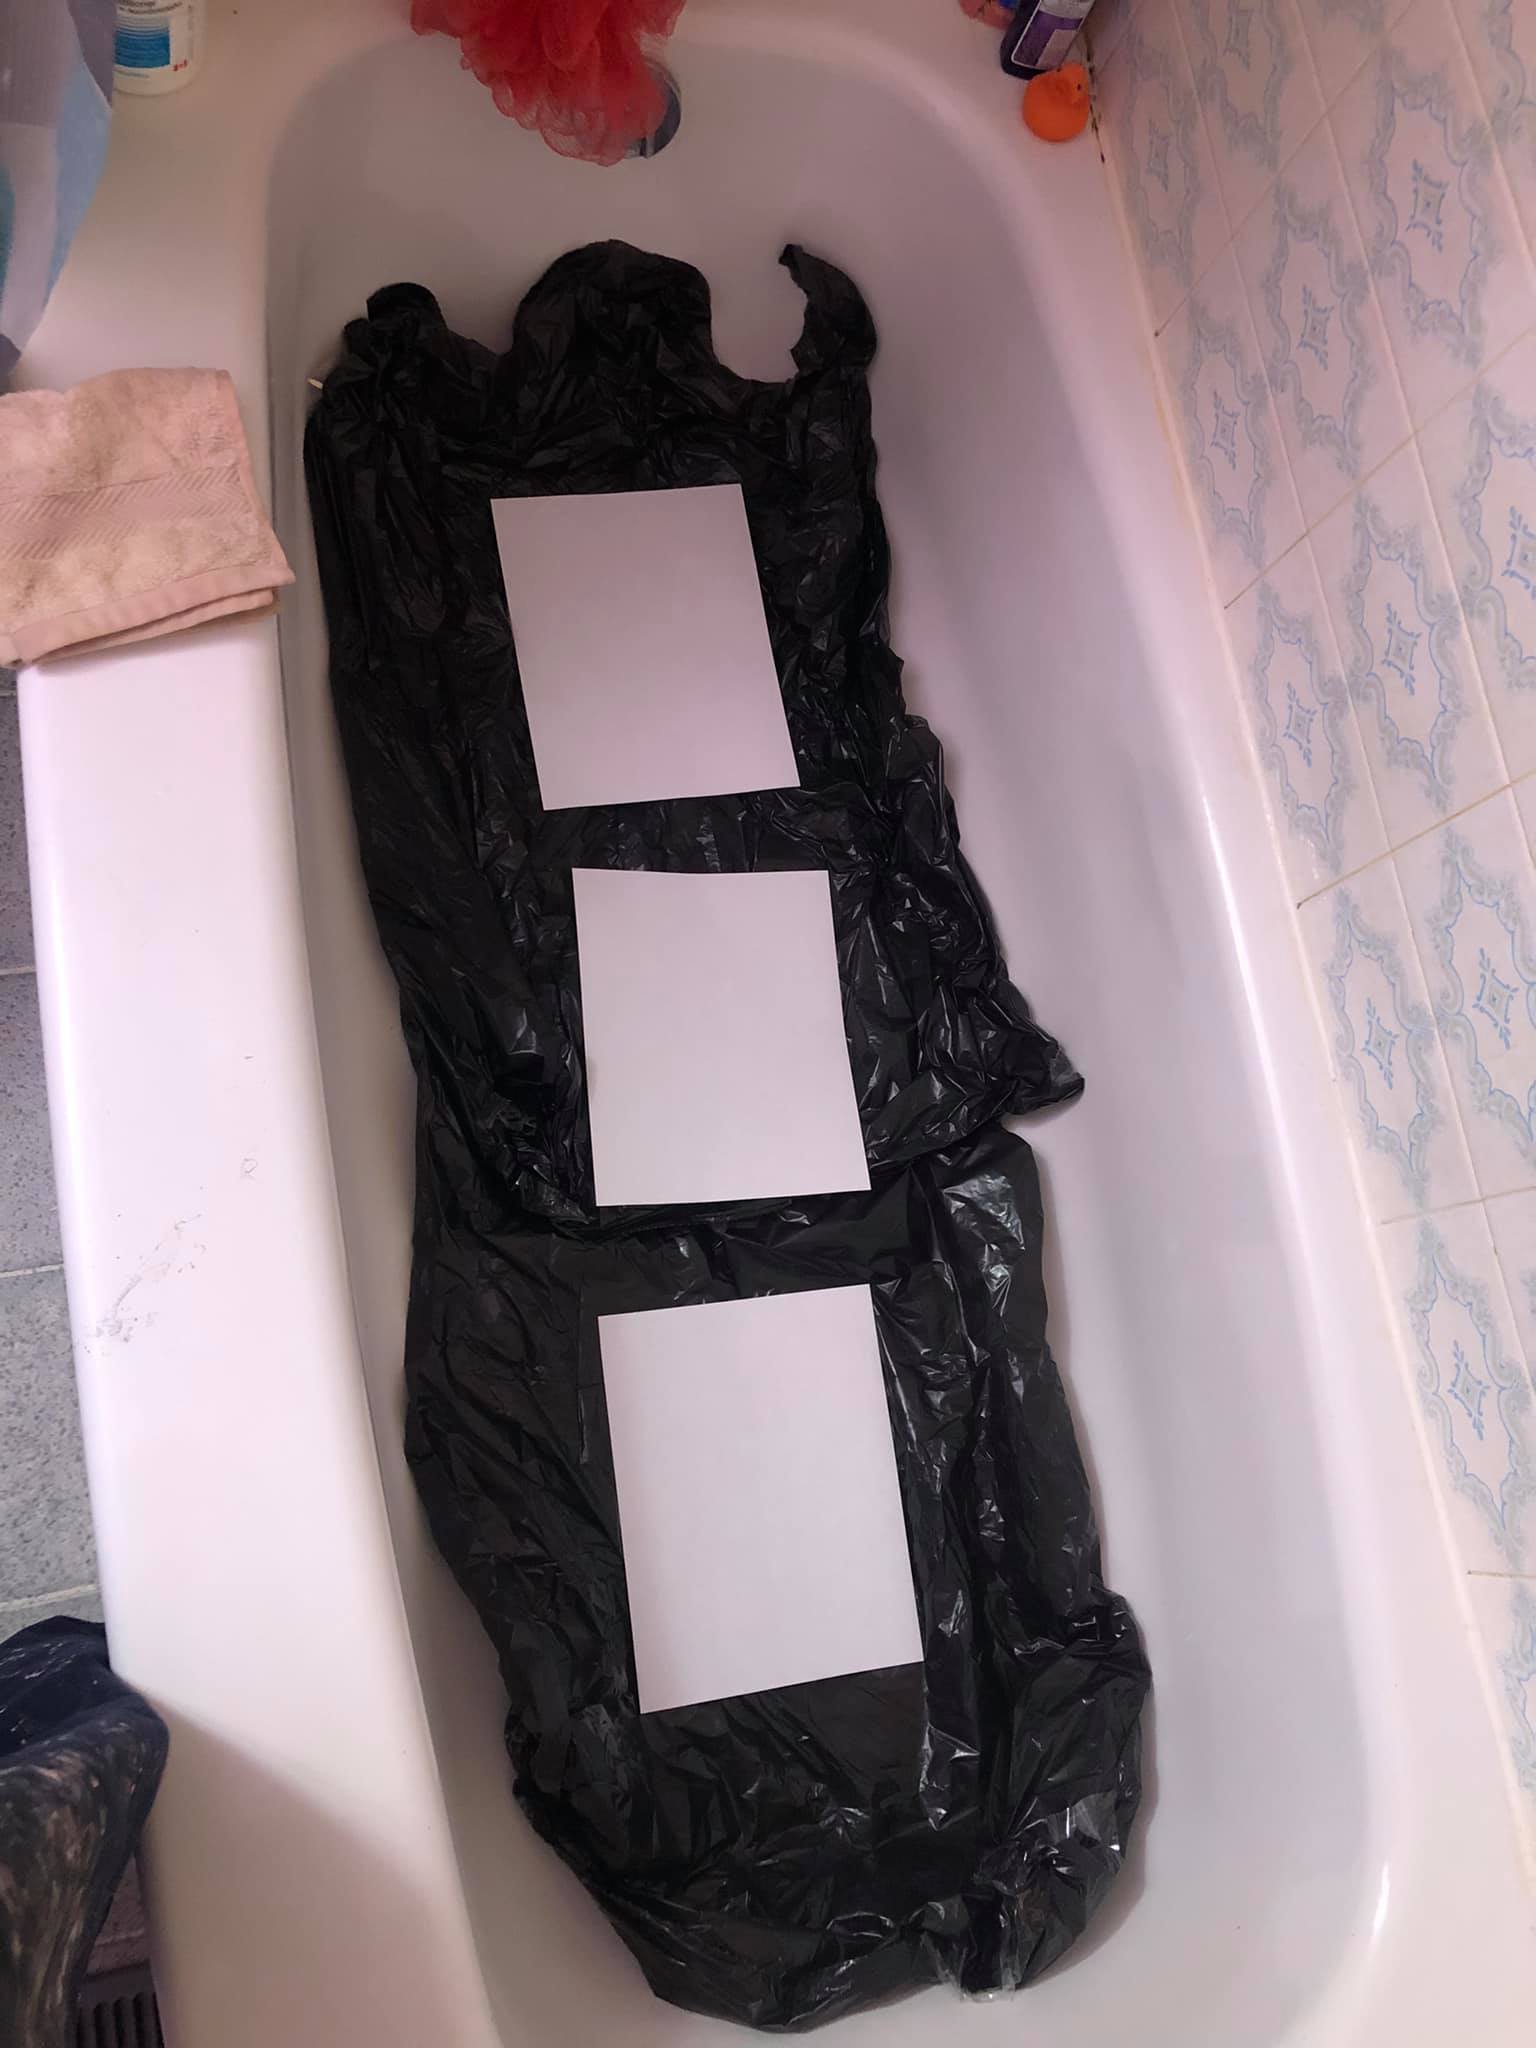 Three canvases lay in a bathtub, with black garbage bags laid out beneath to protect the bottom.